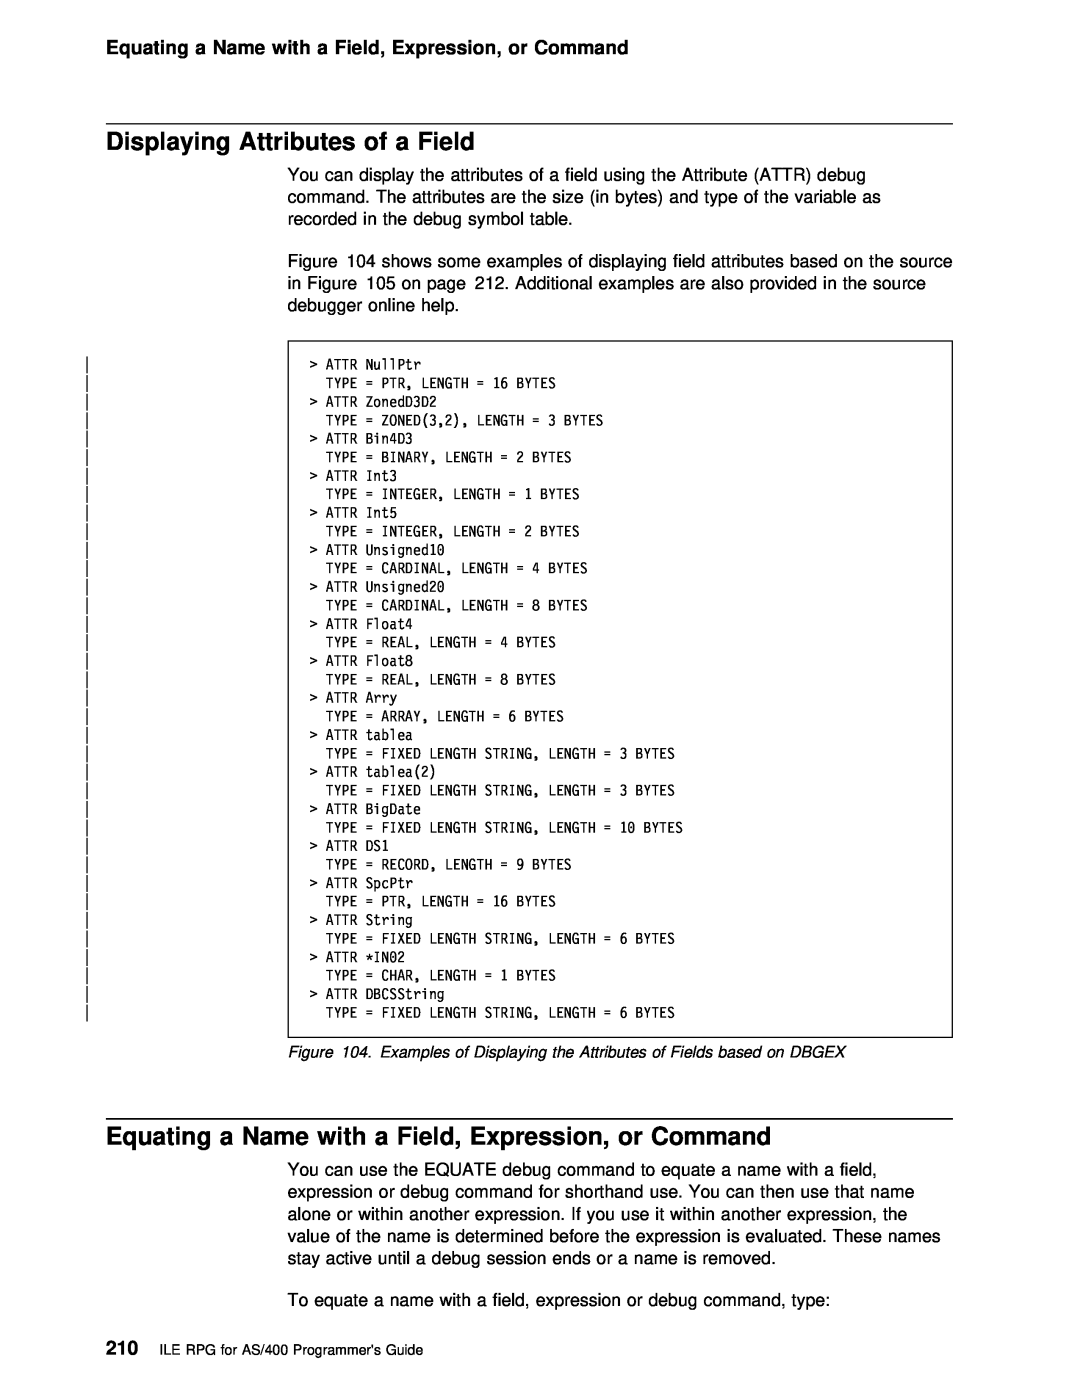 IBM AS/400 manual Displaying Attributes of a Field, or Command, Equating a Name with, Expression 